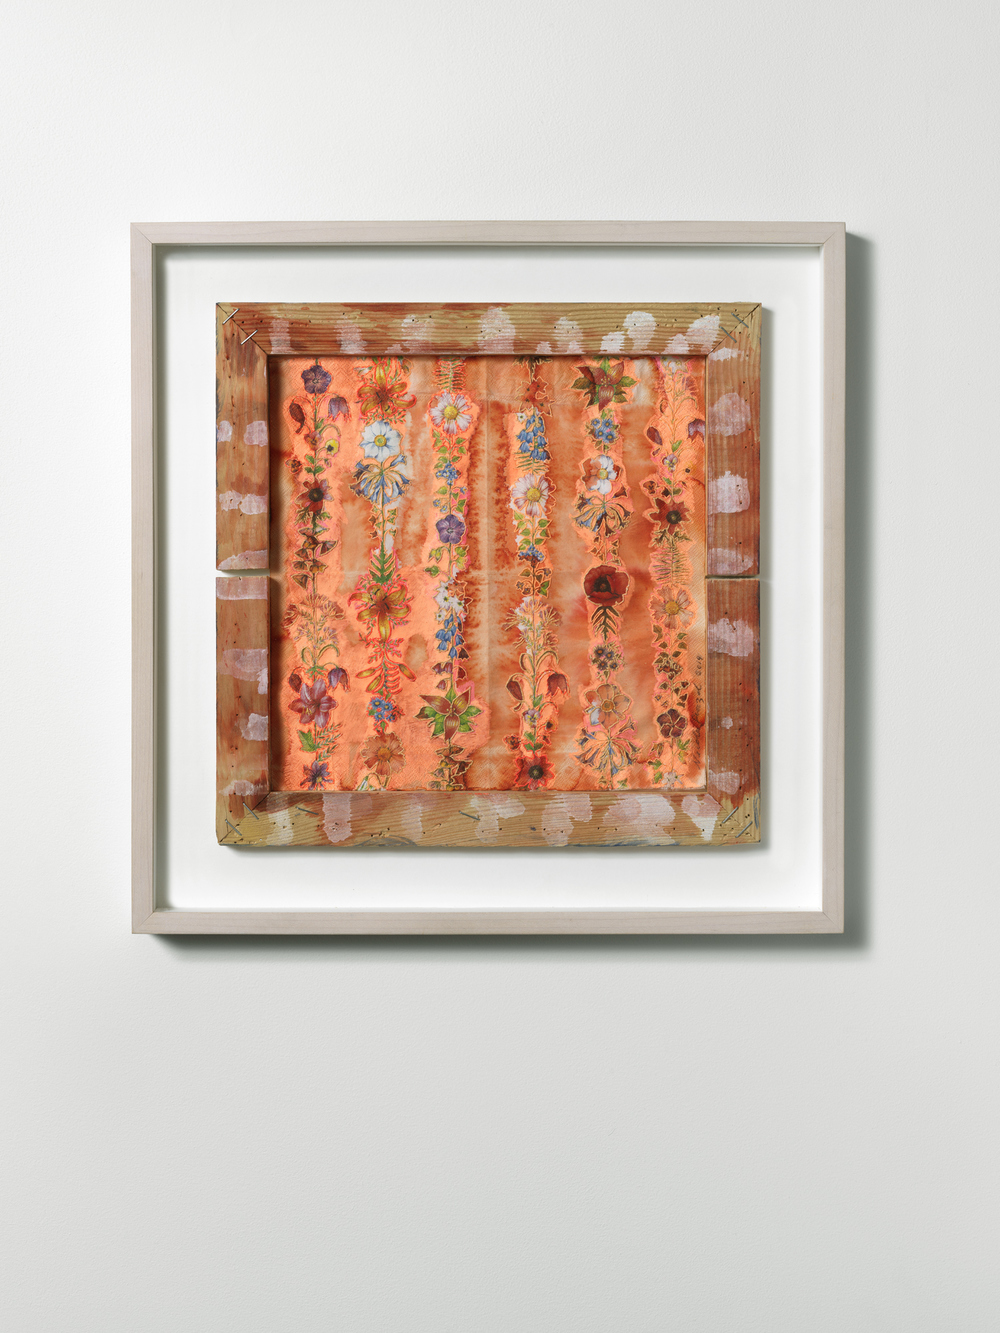 Nicola Ginzel  Archive/ Selected Flatwork  paper napkin with commercially printed flowers, embroidered by hand, ink, backed with BEVA archival adhesive, used wooden stretcher frame